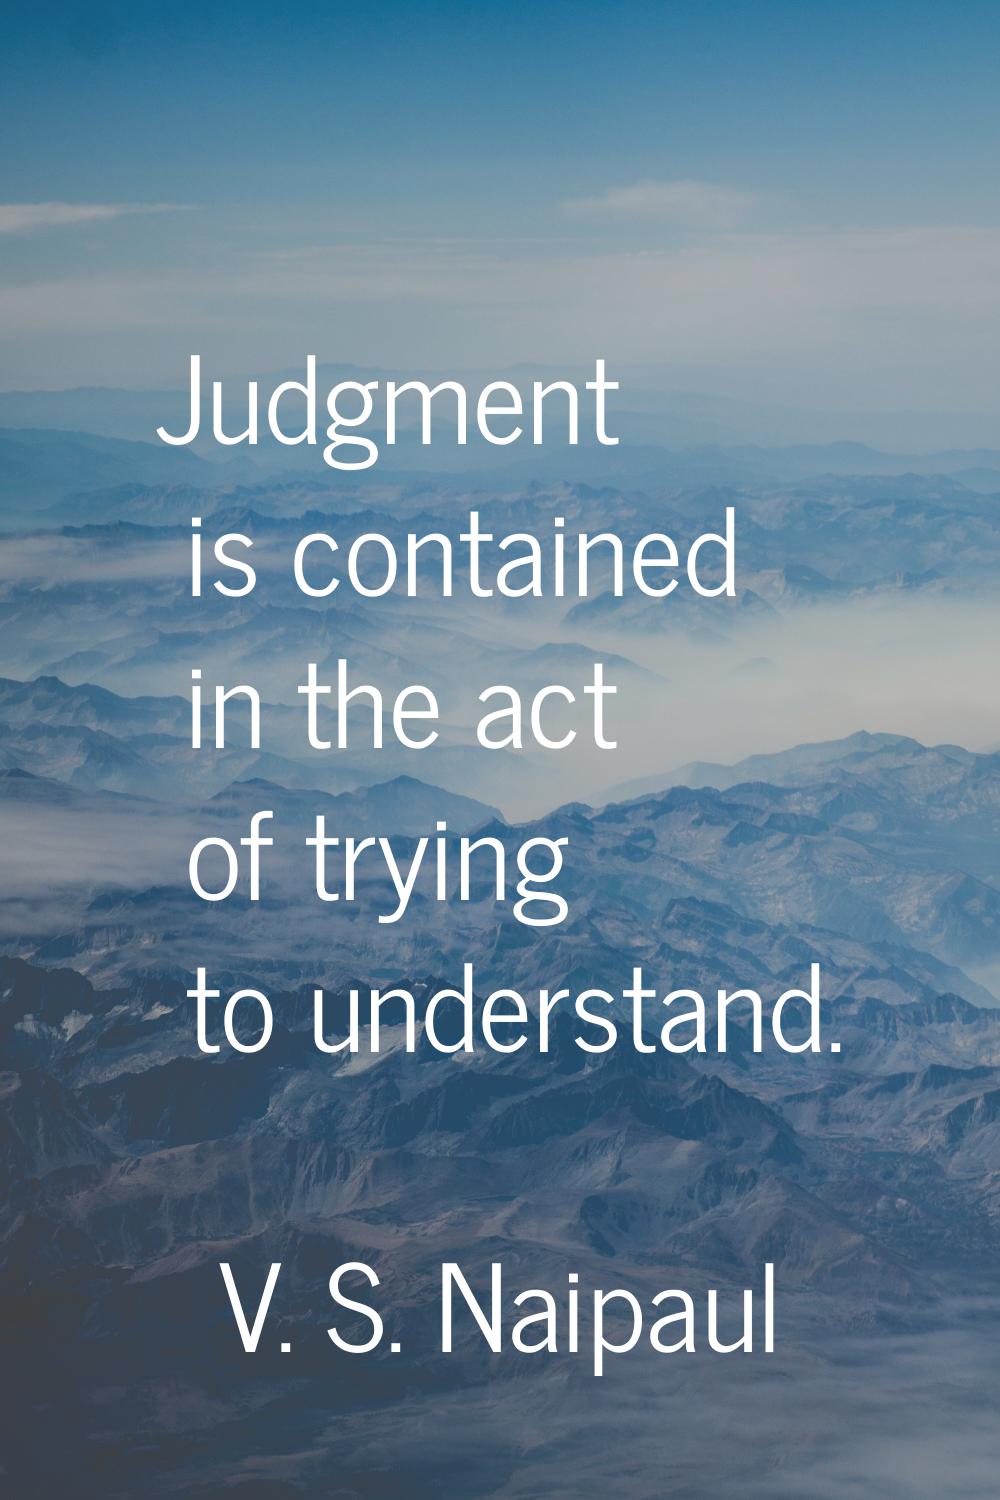 Judgment is contained in the act of trying to understand.